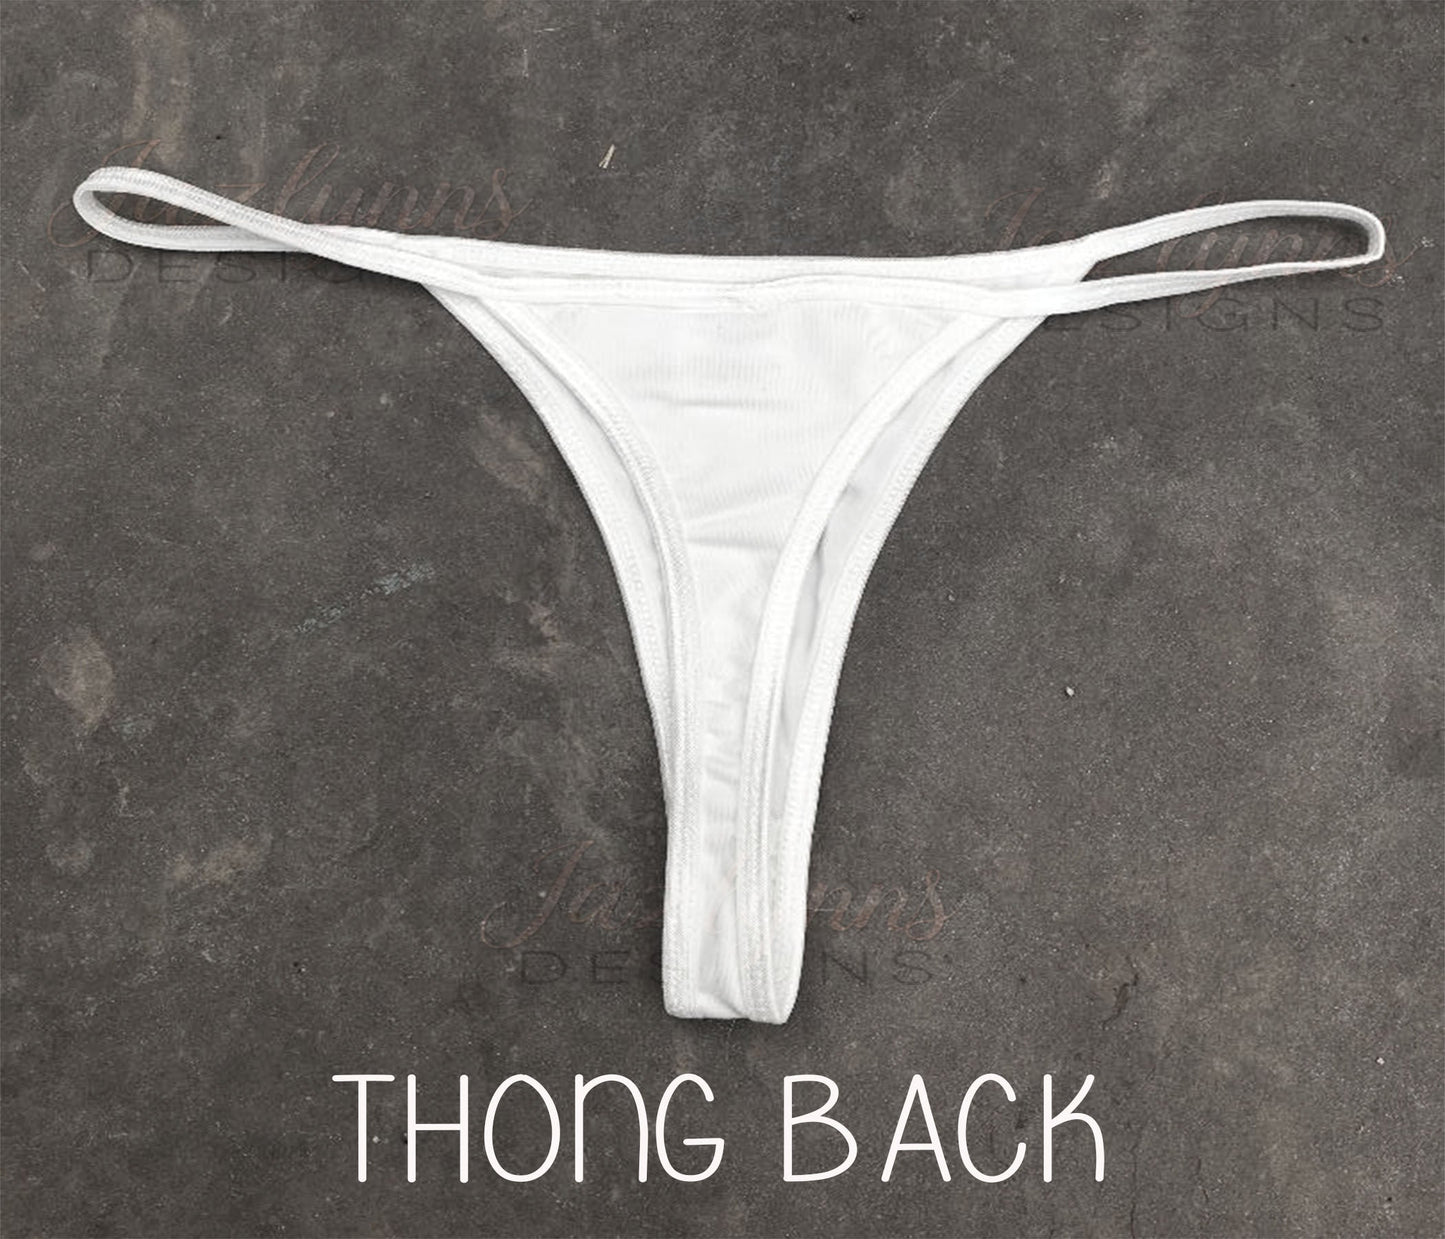 You may now fuck the bride Classic Thong